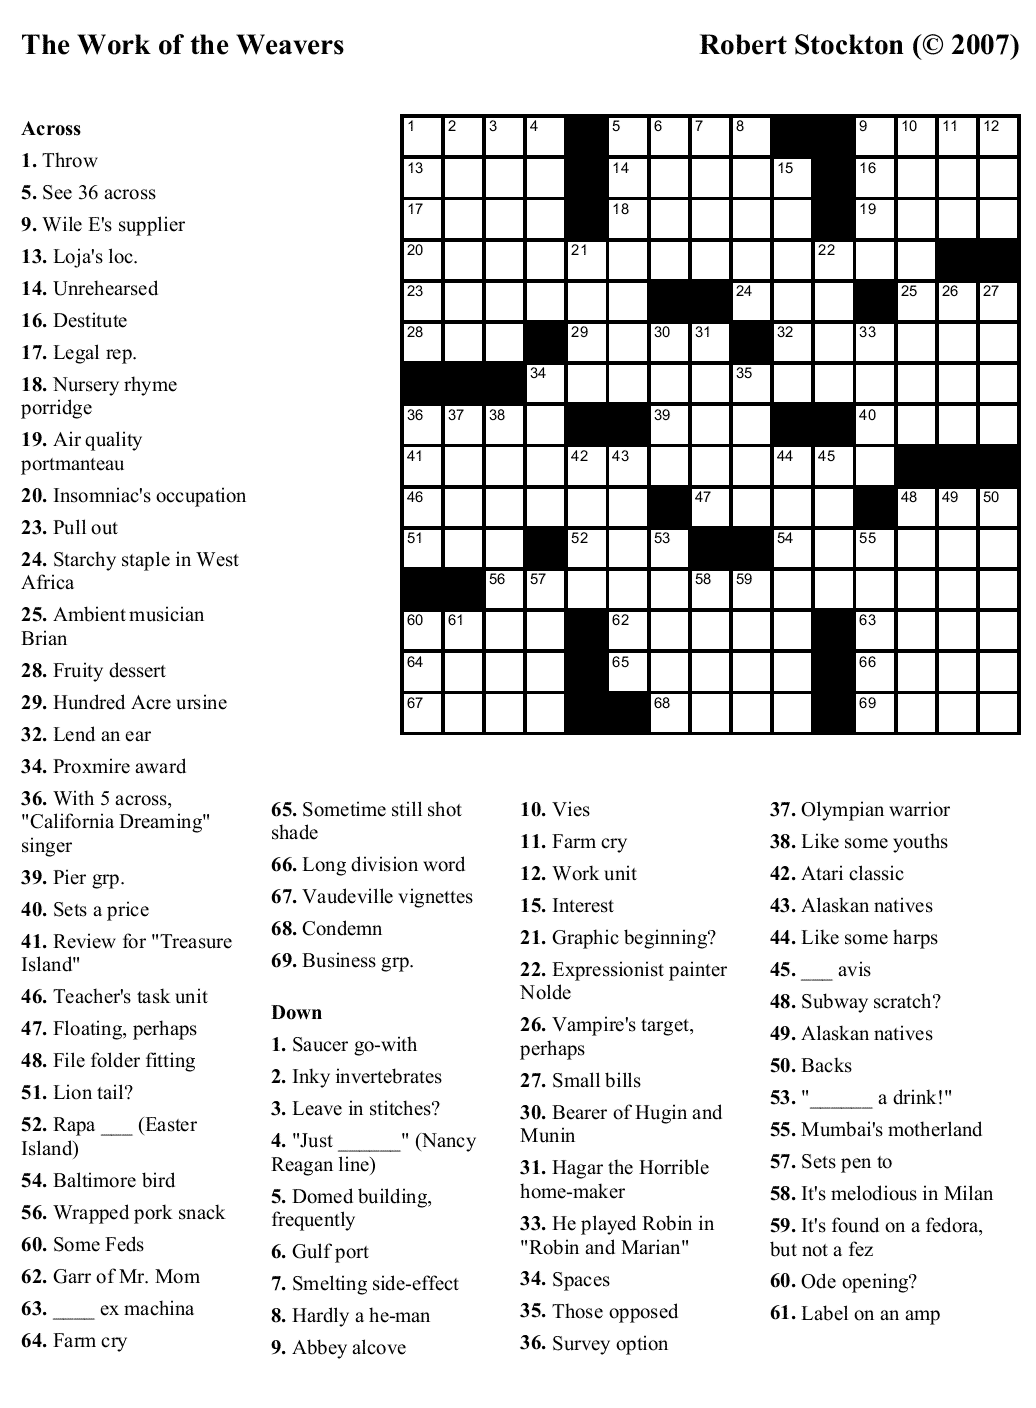 How to be a better crossword puzzler